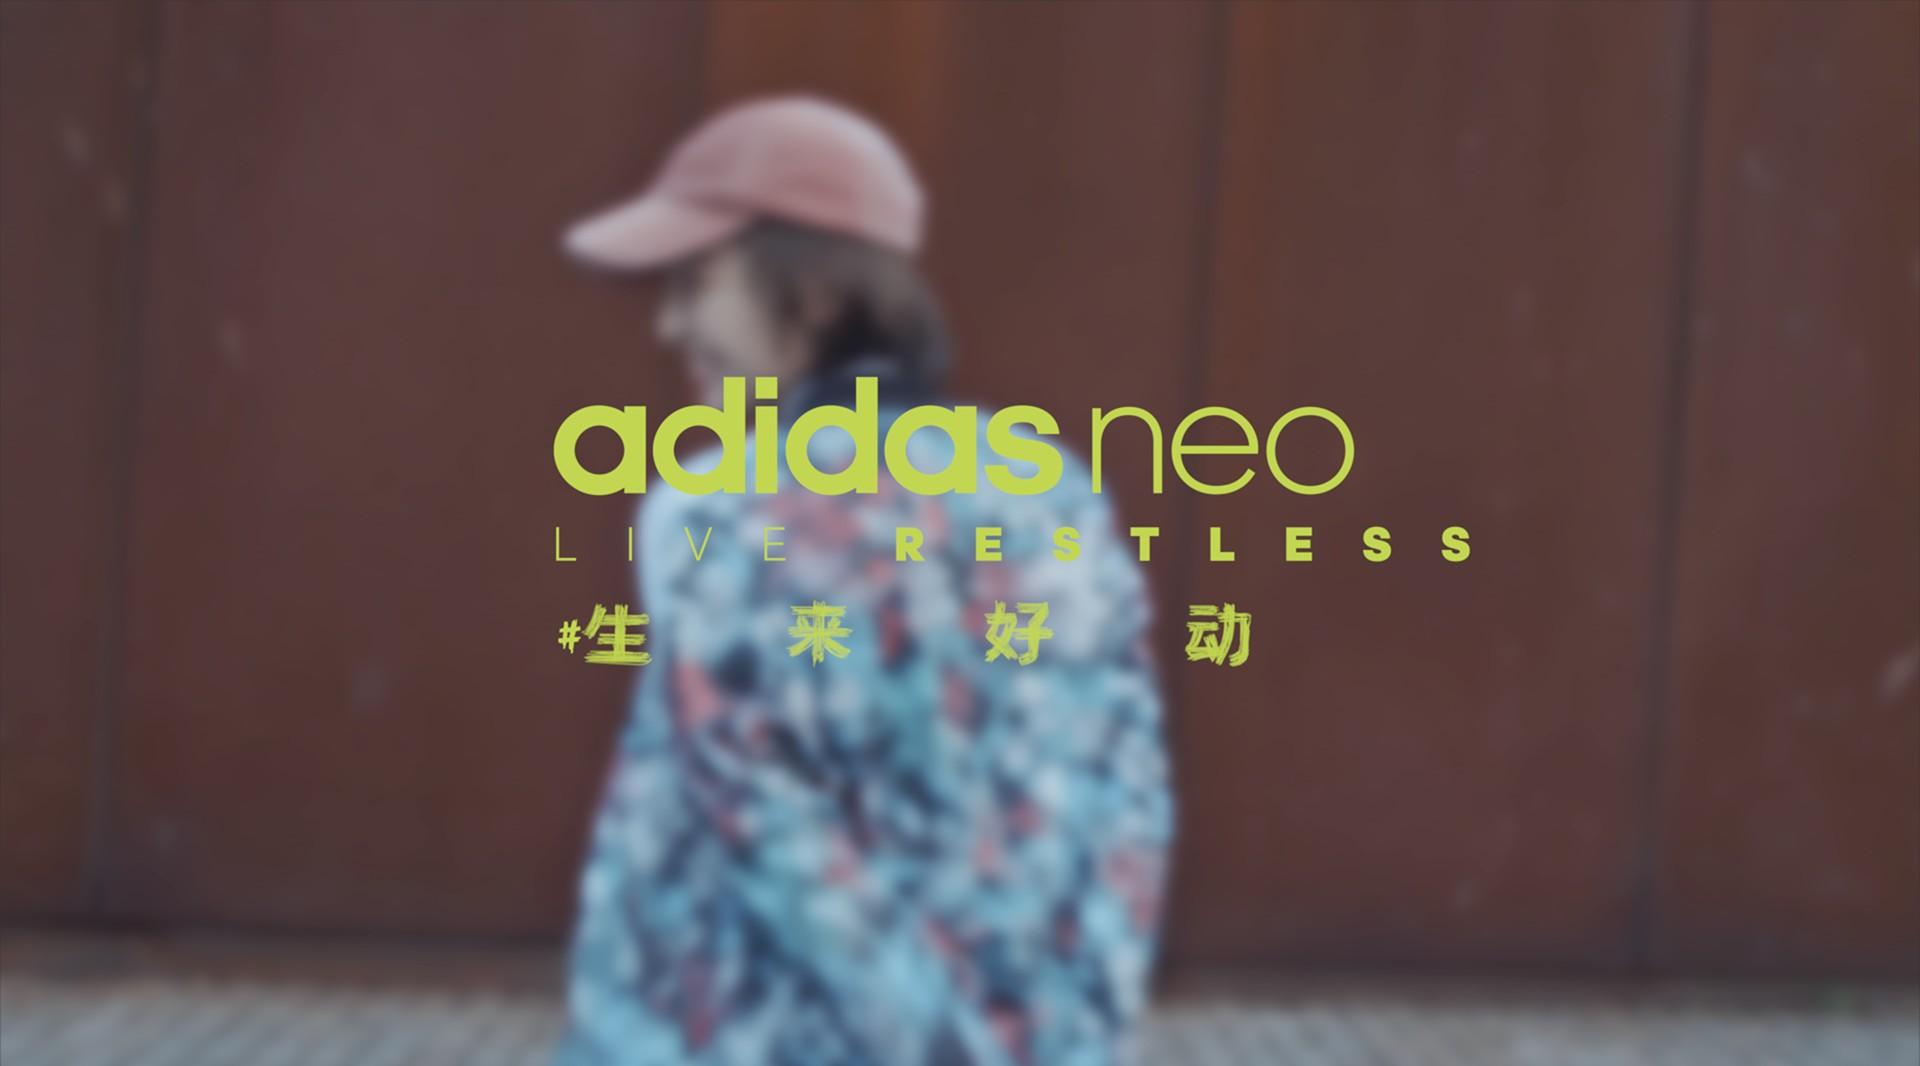 ADIDAS NEO _ 生来好动 All in One